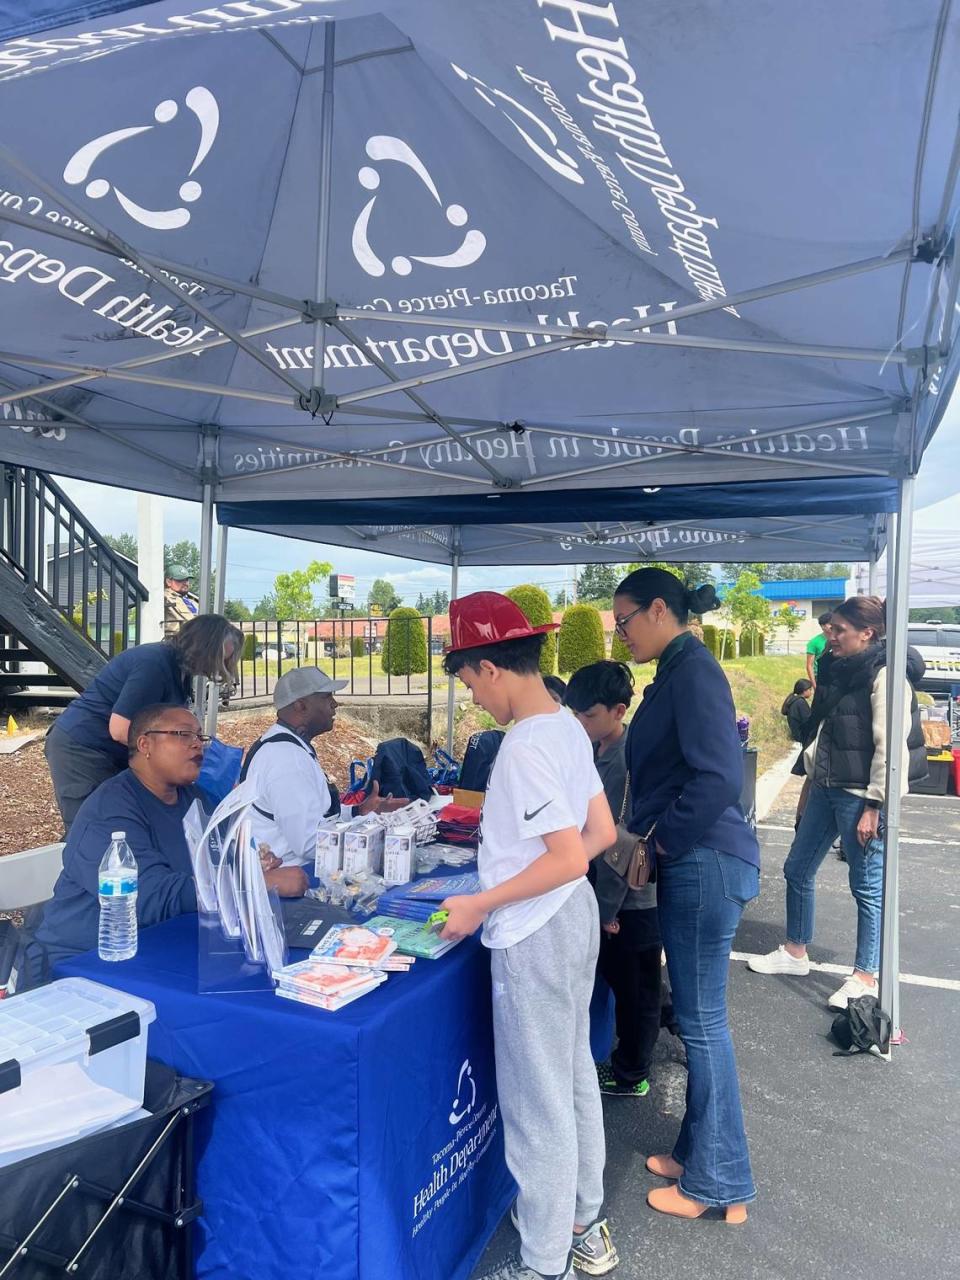 Tacoma-Pierce County Health Department was among the participants with a booth at the Healthy Hosmer Initiative event June 1 at Sage’s Cascade Ridge property.